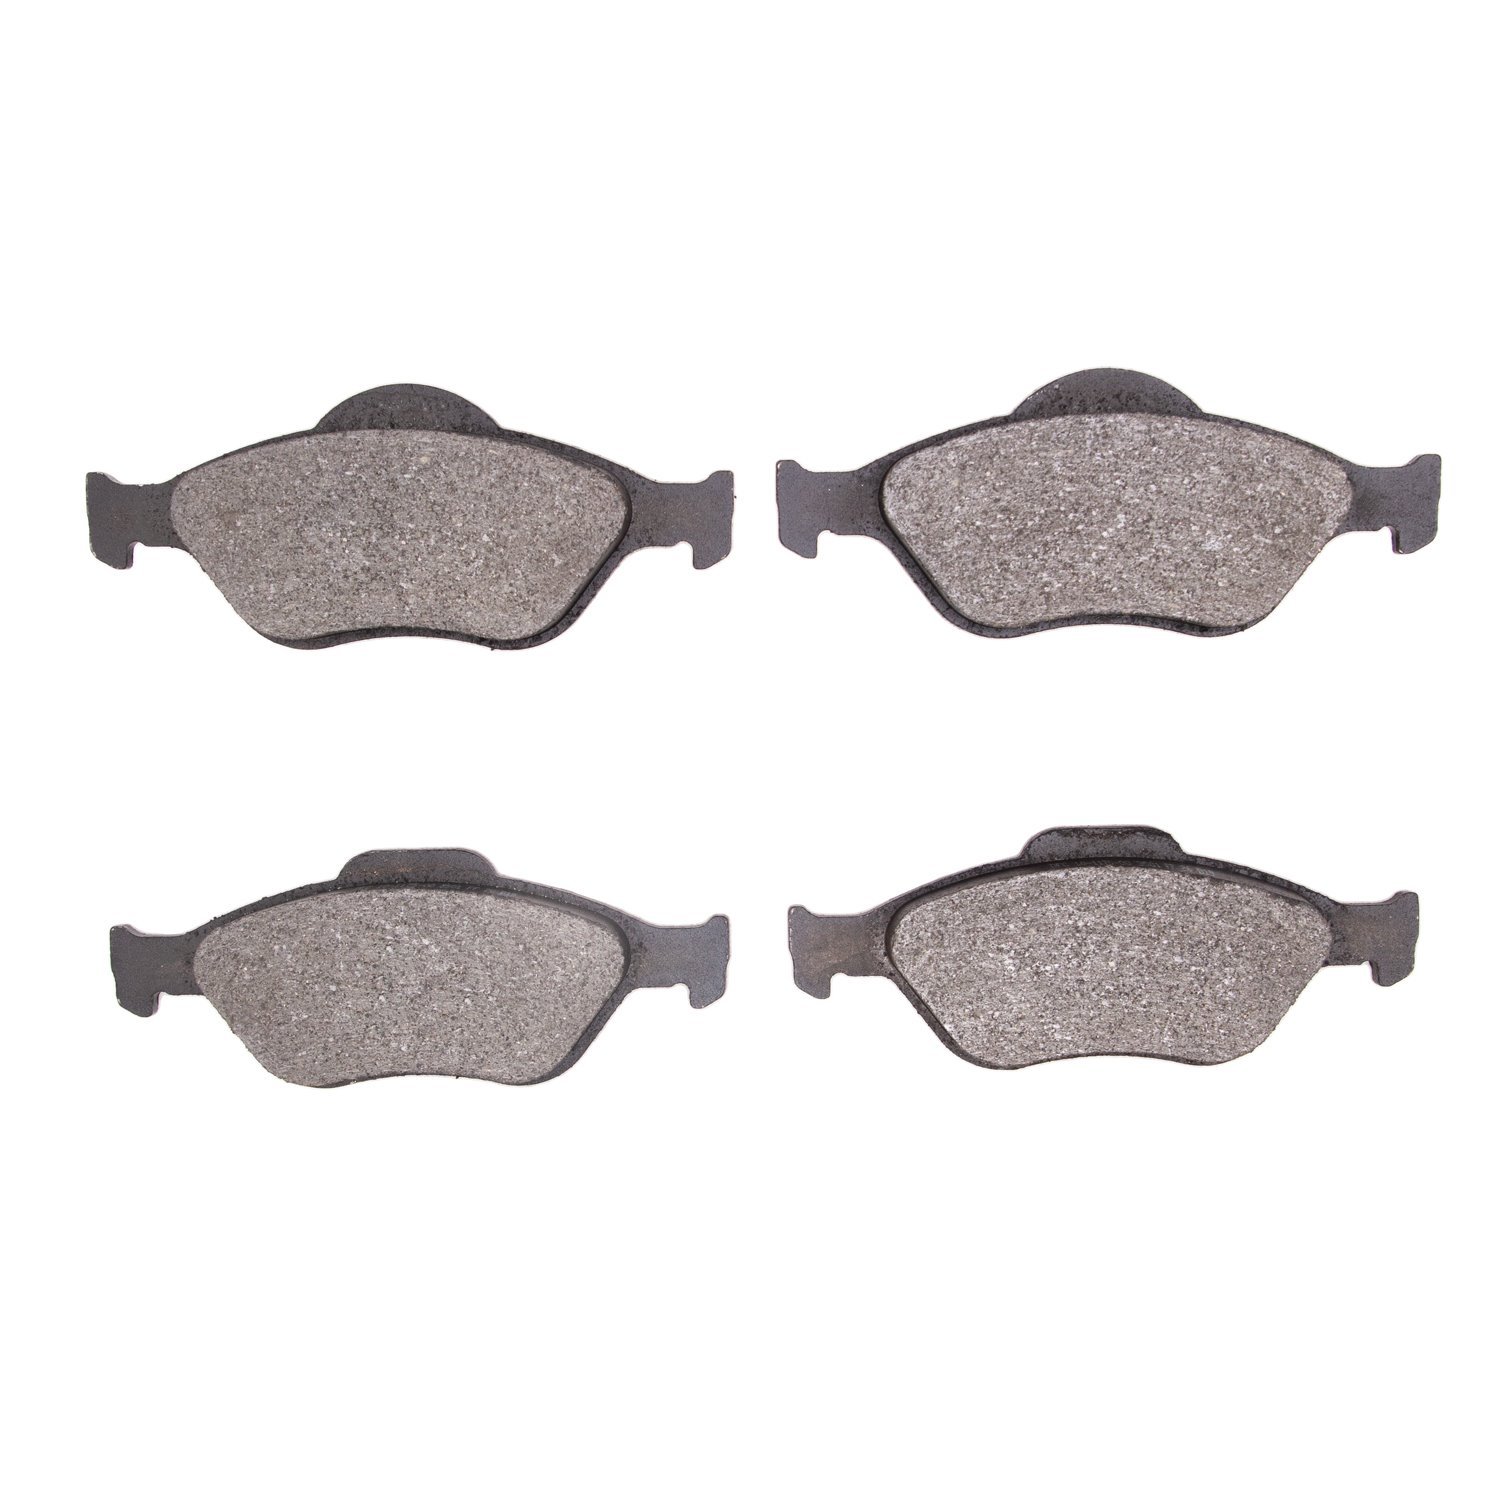 1310-1175-00 3000-Series Ceramic Brake Pads, 2004-2015 Ford/Lincoln/Mercury/Mazda, Position: Front